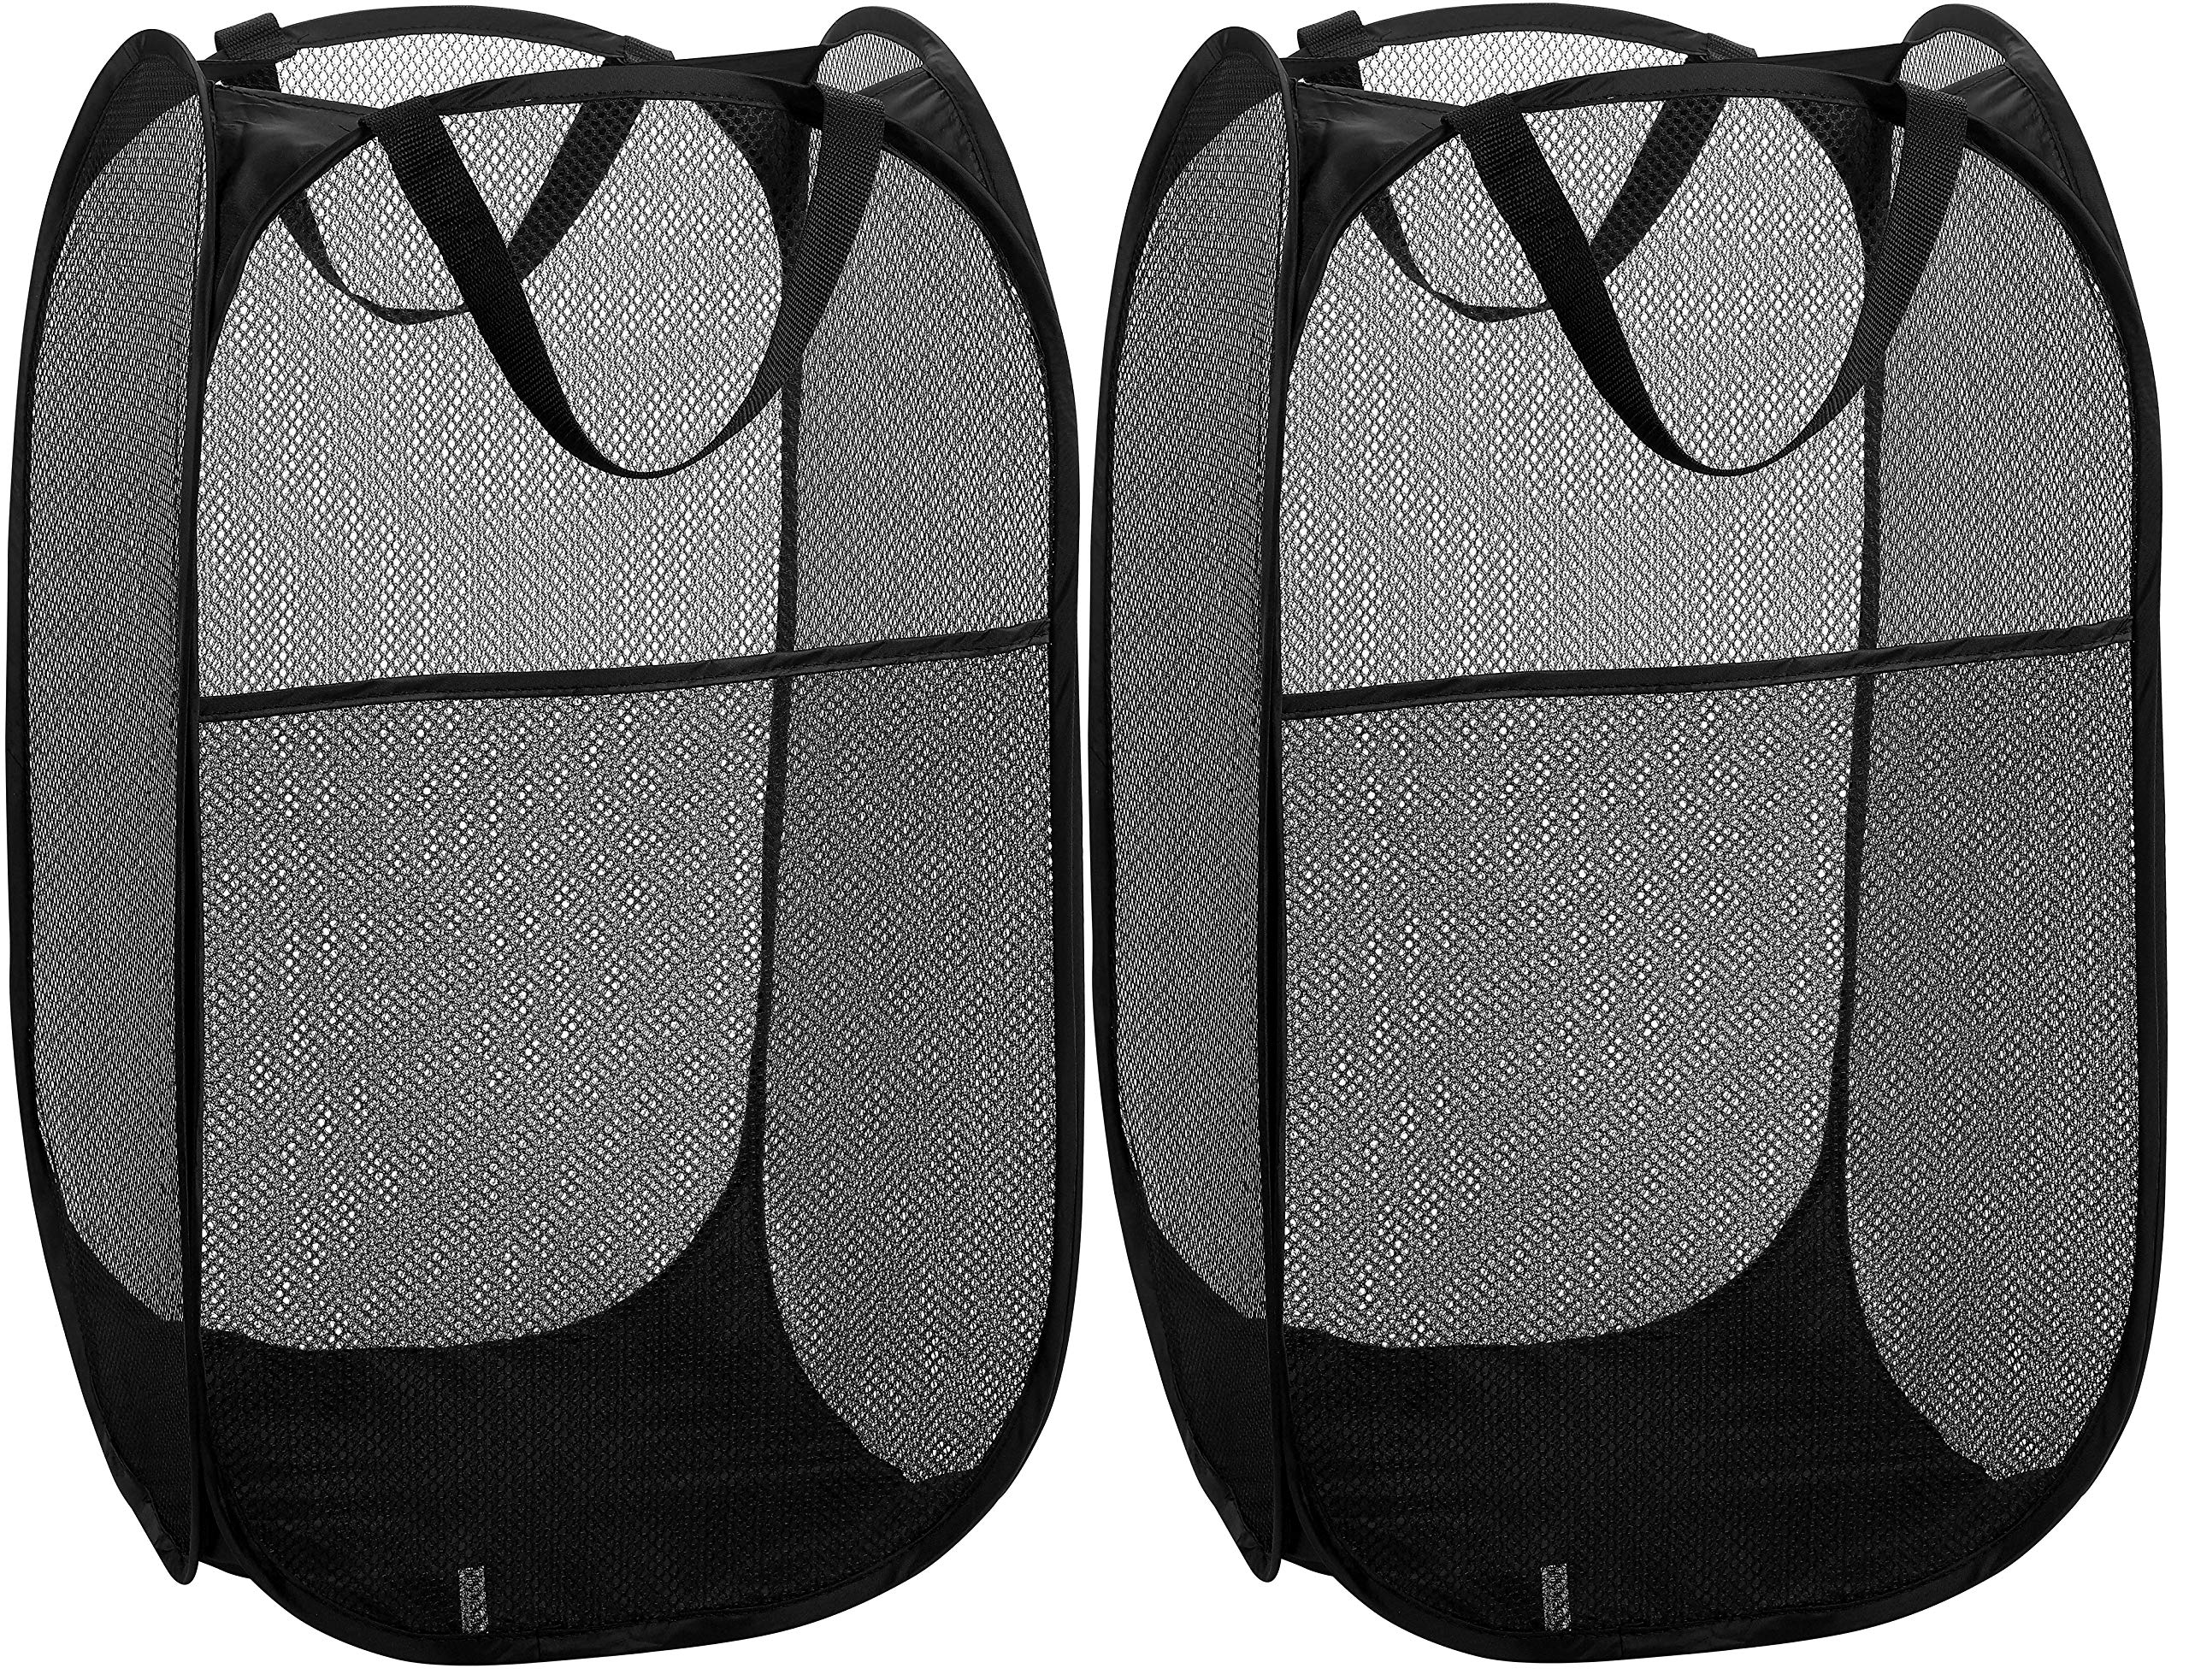 Book Cover Handy Laundry Mesh Popup Hamper – 2-Pack Foldable Lightweight Basket for Washing – Durable Clothing Storage for Kids Room, Students College Dorm, Home, Travel & Camping – Black Pop-up Clothes Hamper Black, 2-pack